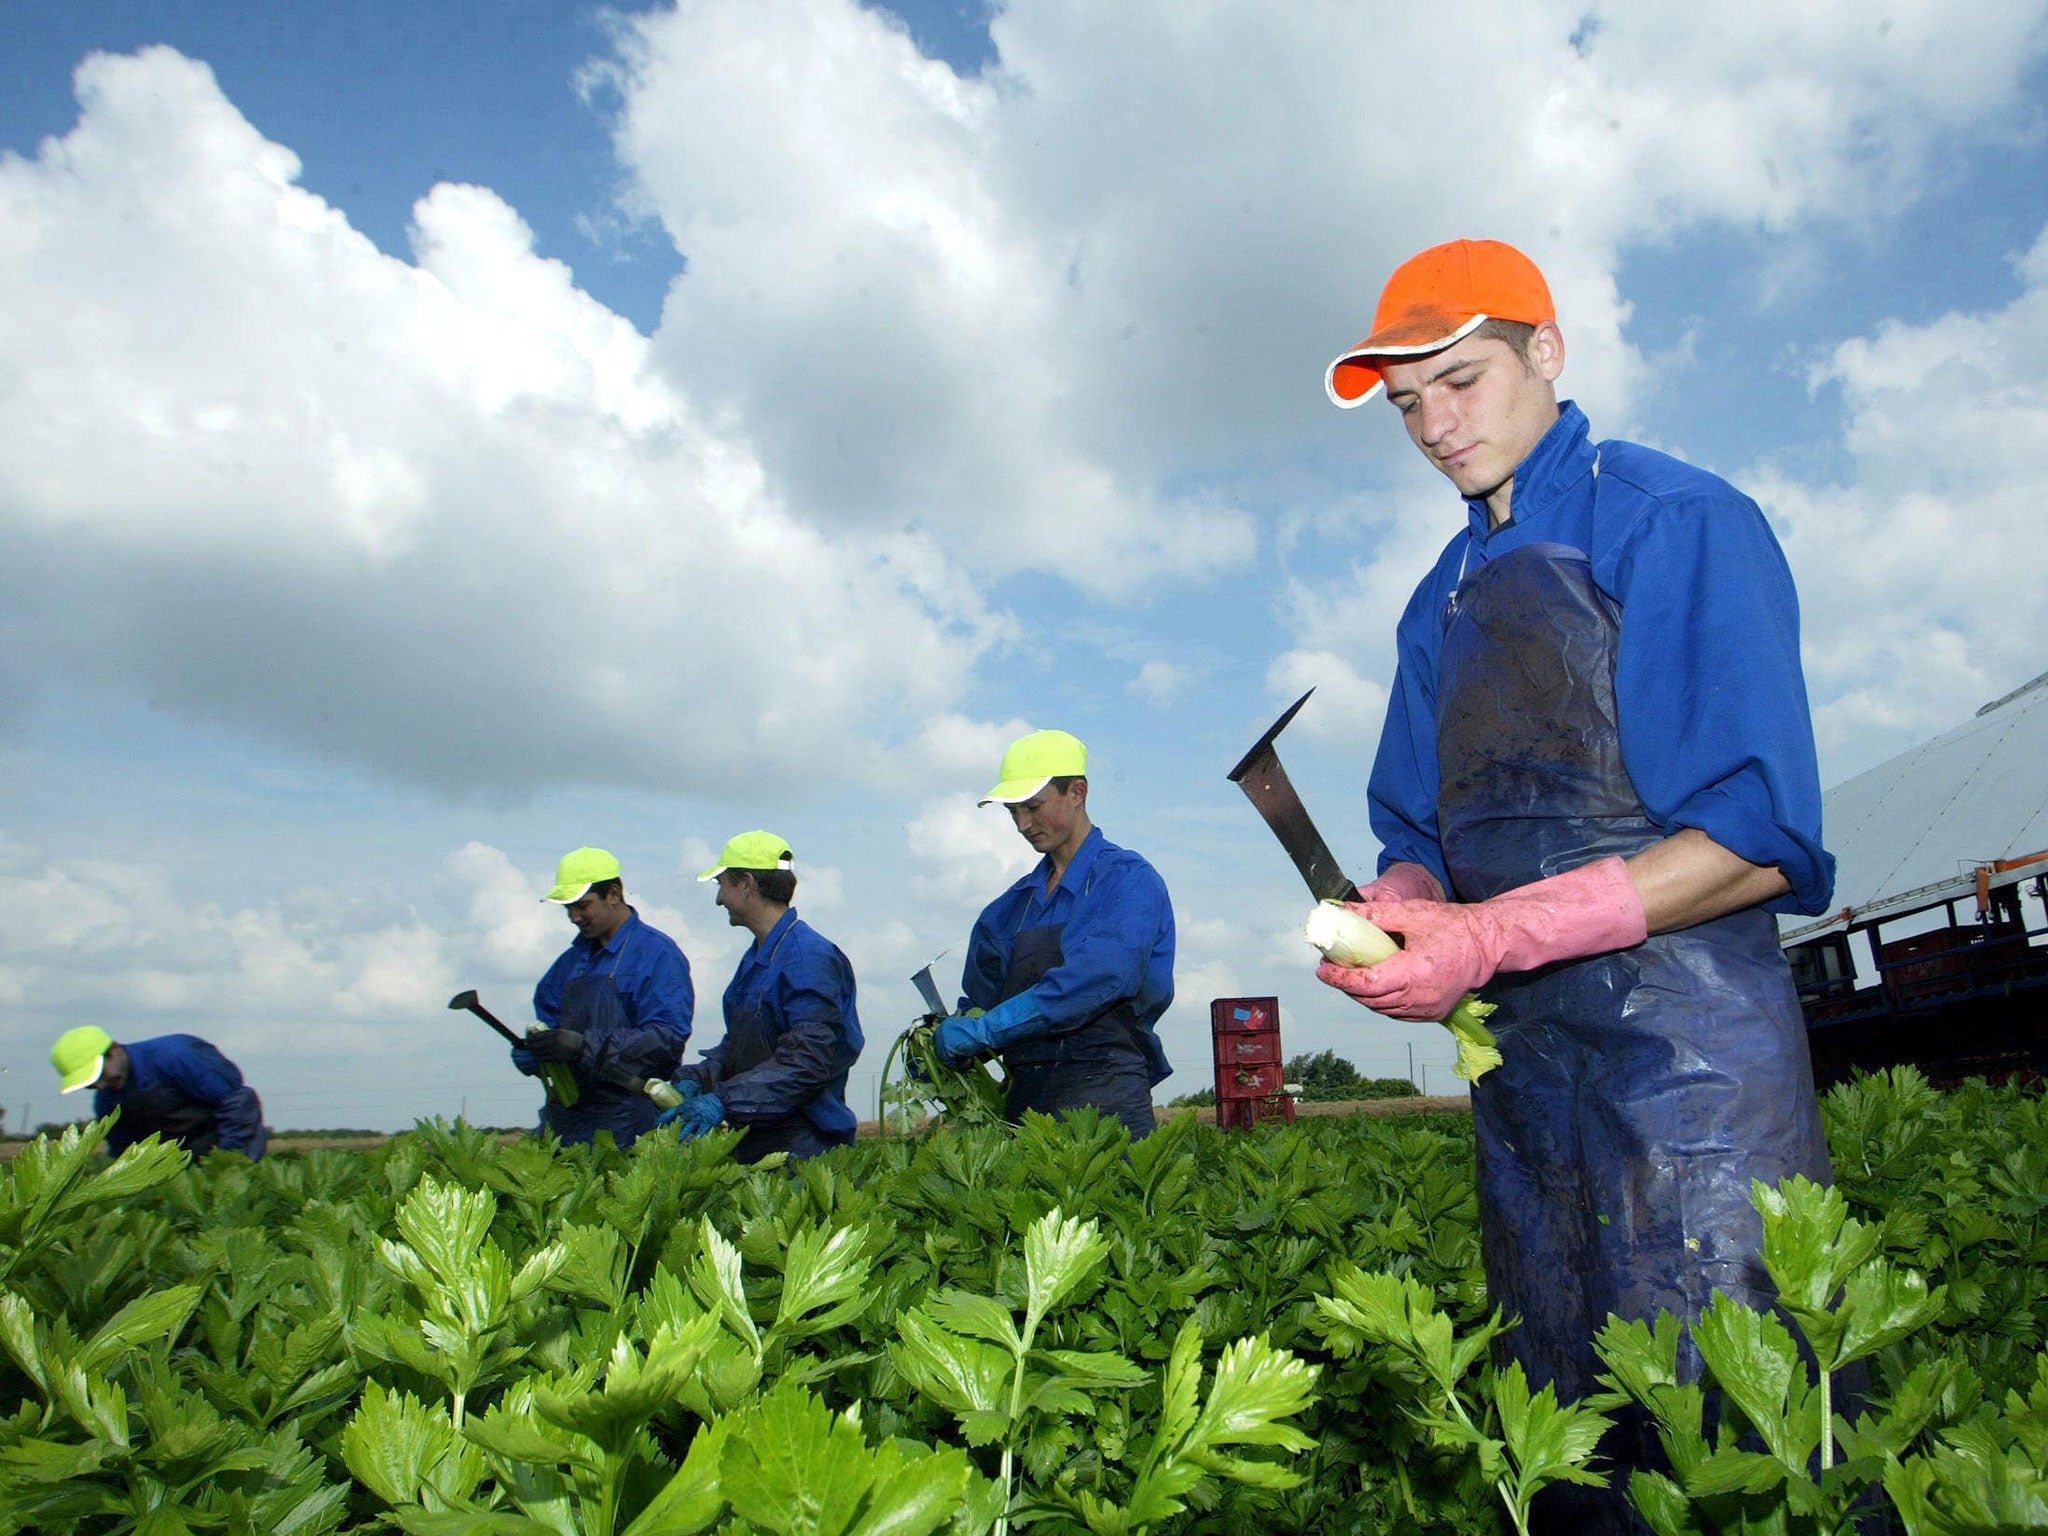 Migrant workers on a farm in Cambridgeshire